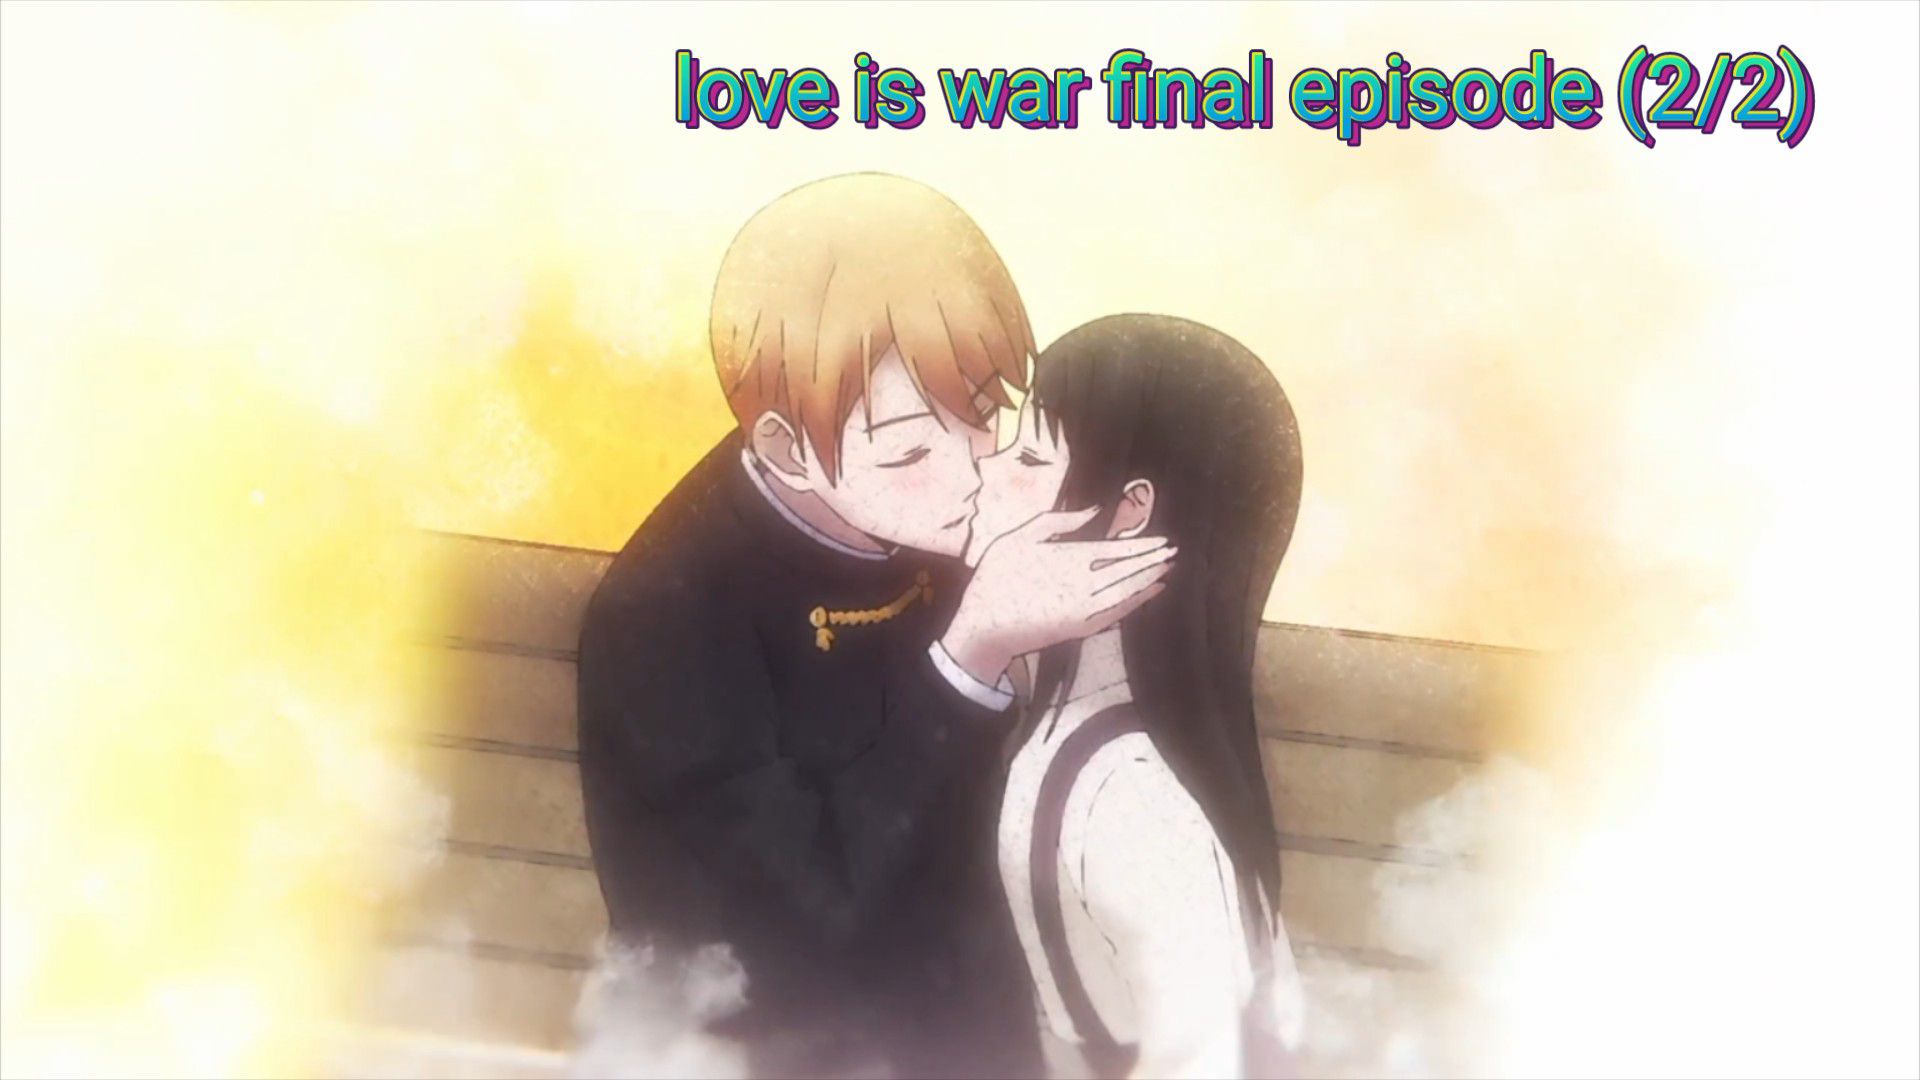 Kaguya-sama: Love Is War — The First Kiss Never Ends Confirmed To